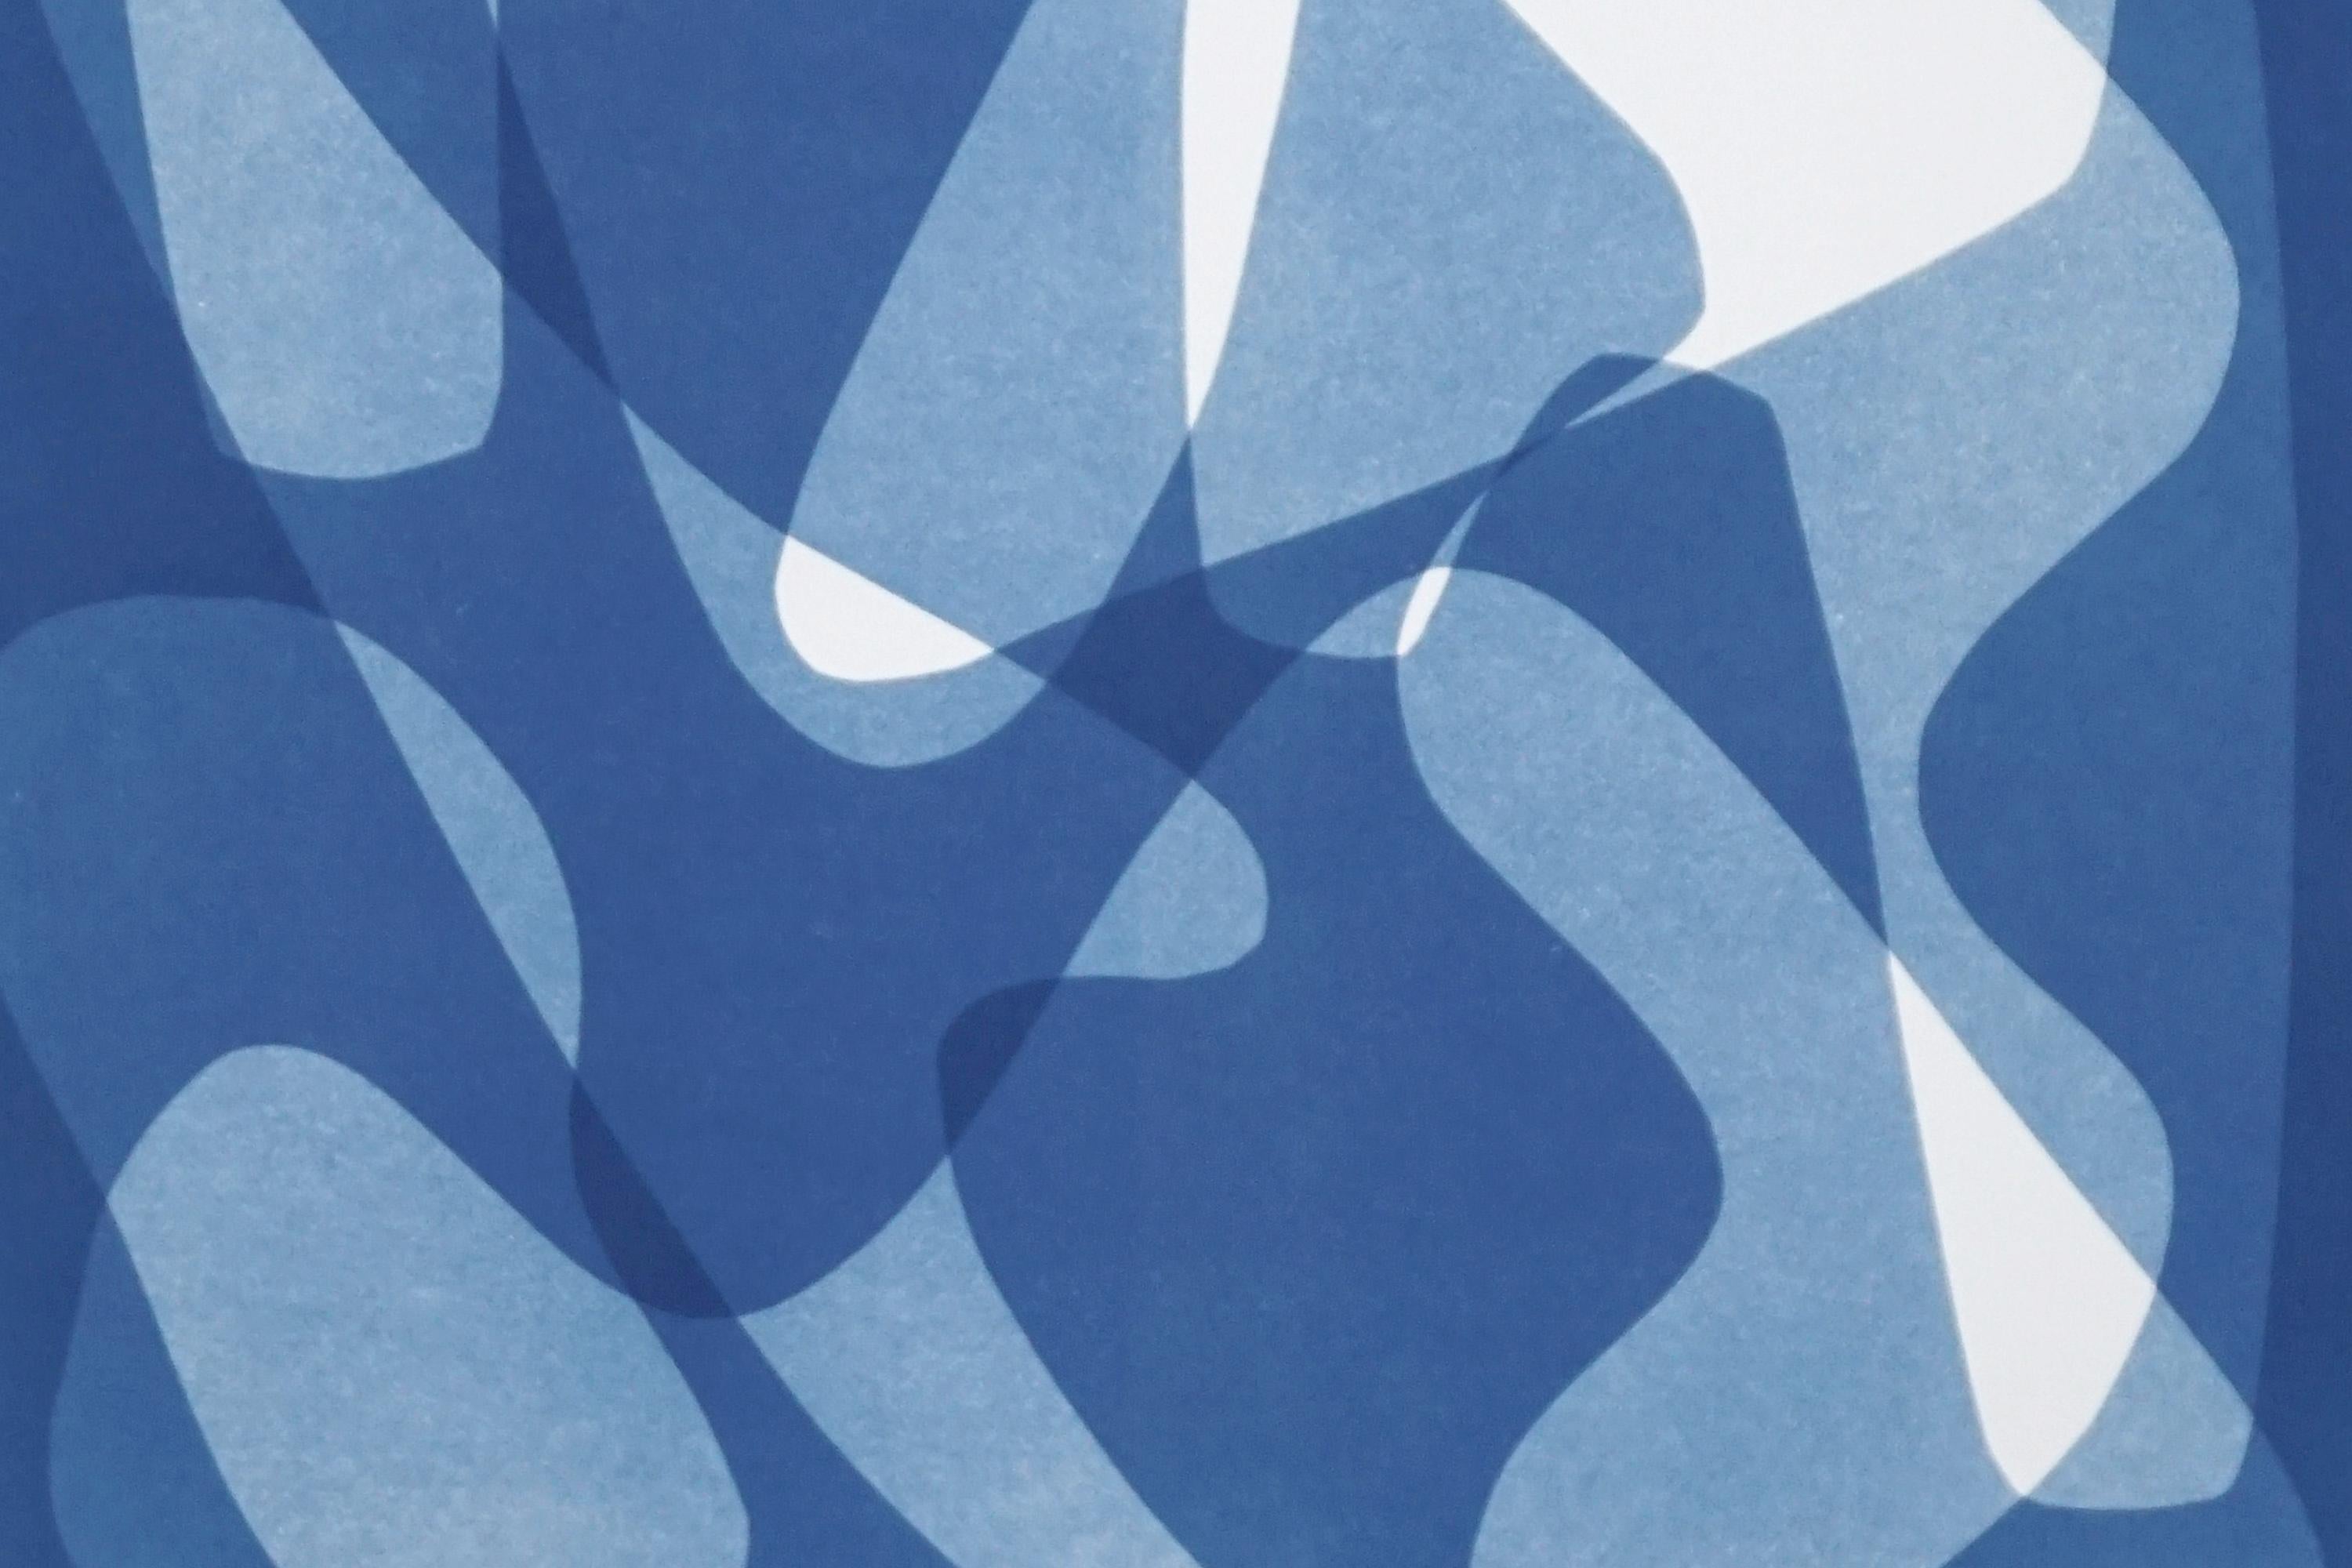 This is an exclusive handprinted unique cyanotype that takes its inspiration from the mid-century modern shapes.
It's made by layering paper cutouts and different exposures using uv-light. 

Details:
+ Title: Geometric Mid Century Vibes I
+ Year: